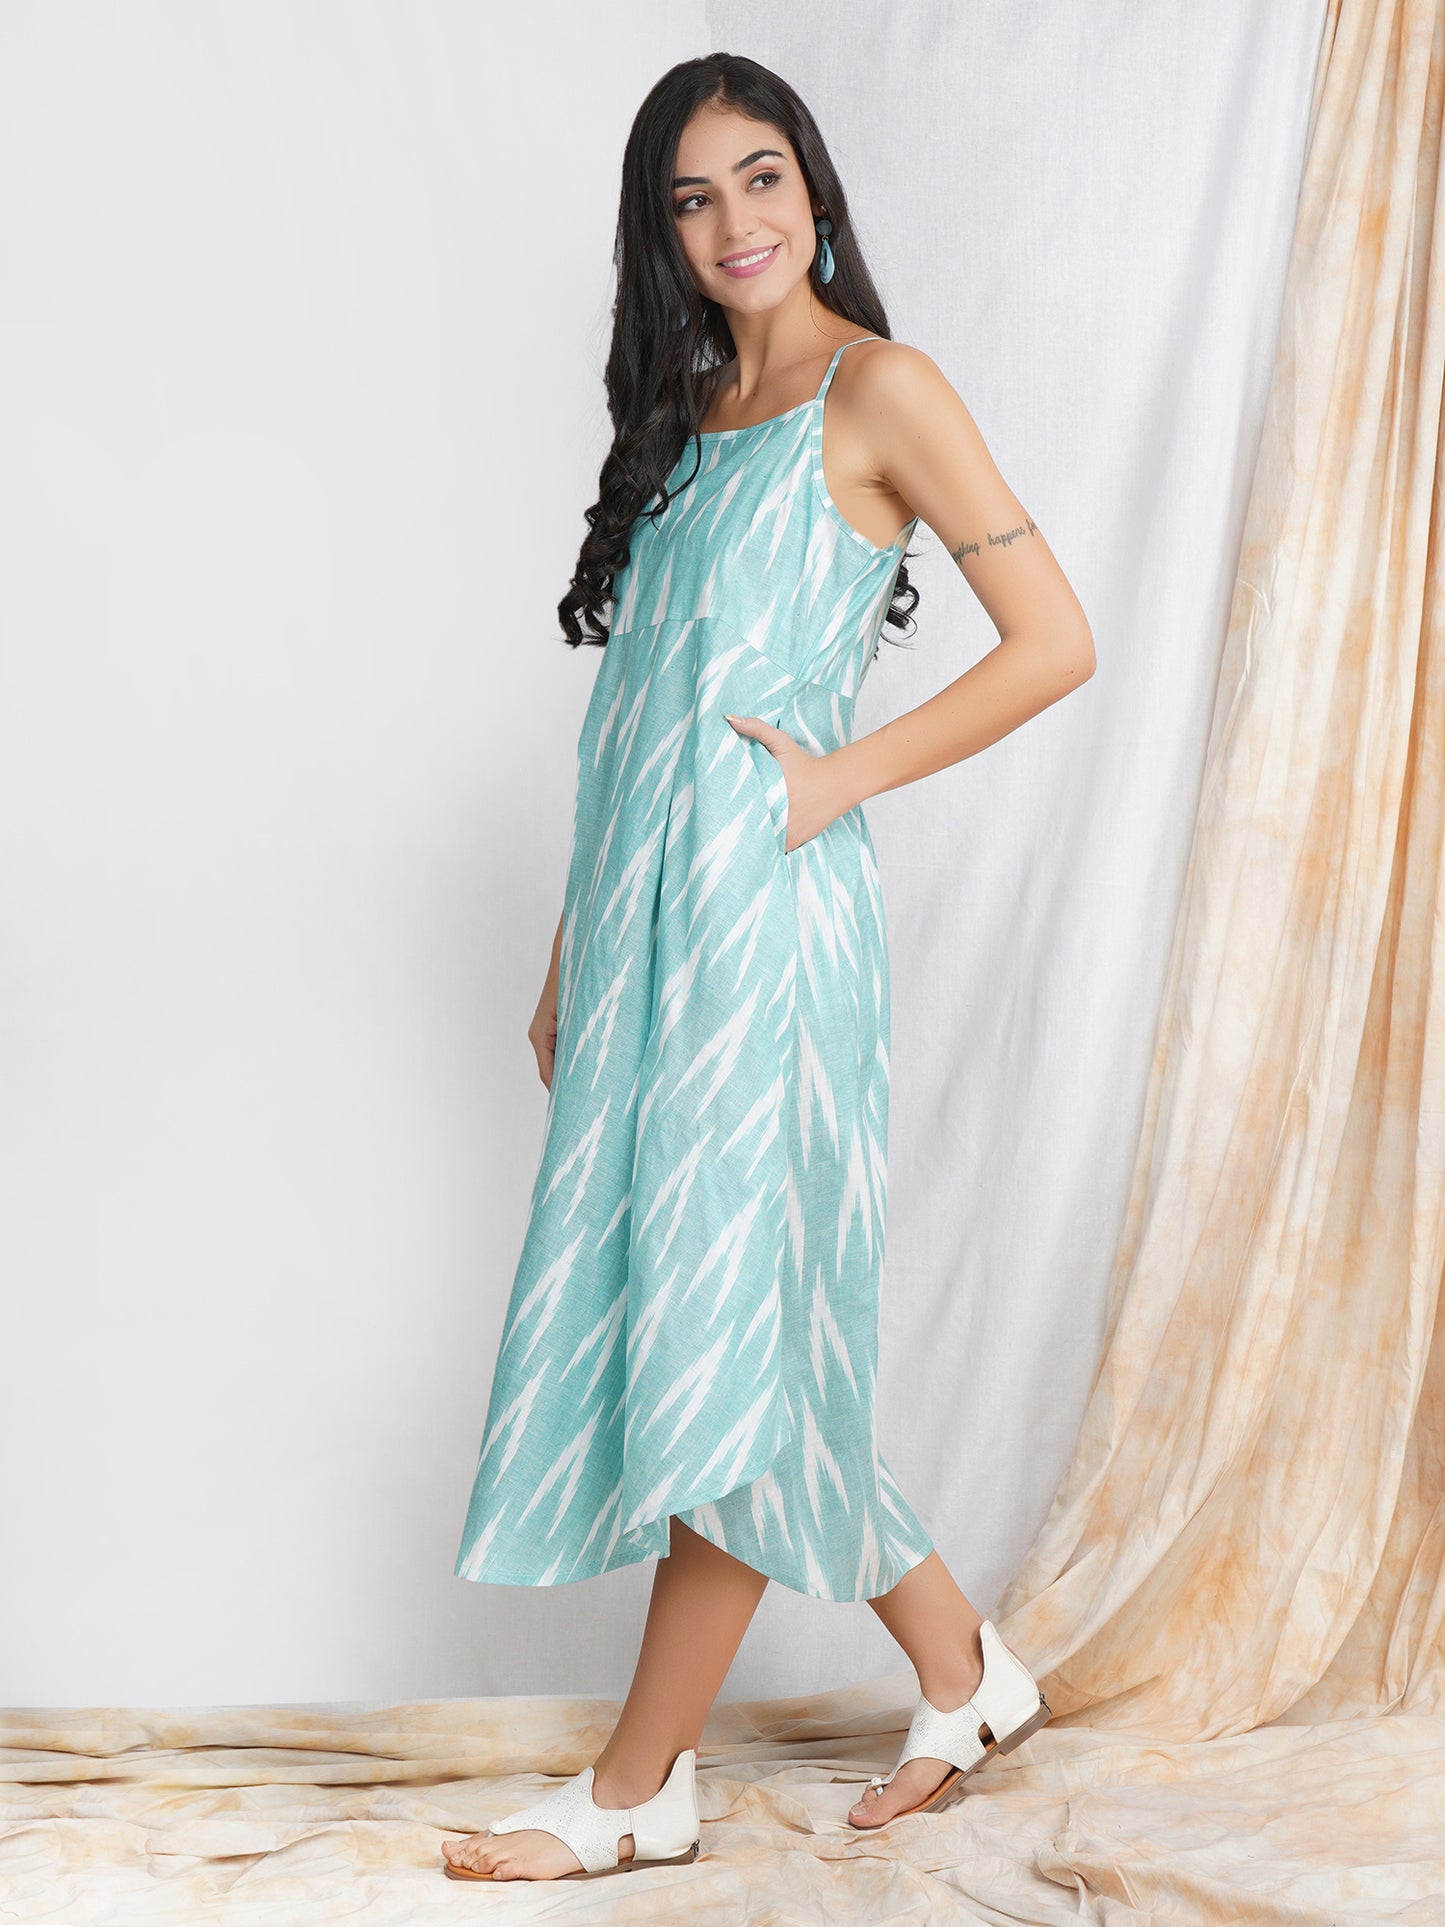 Turquoise Blue Cotton Dress for Women